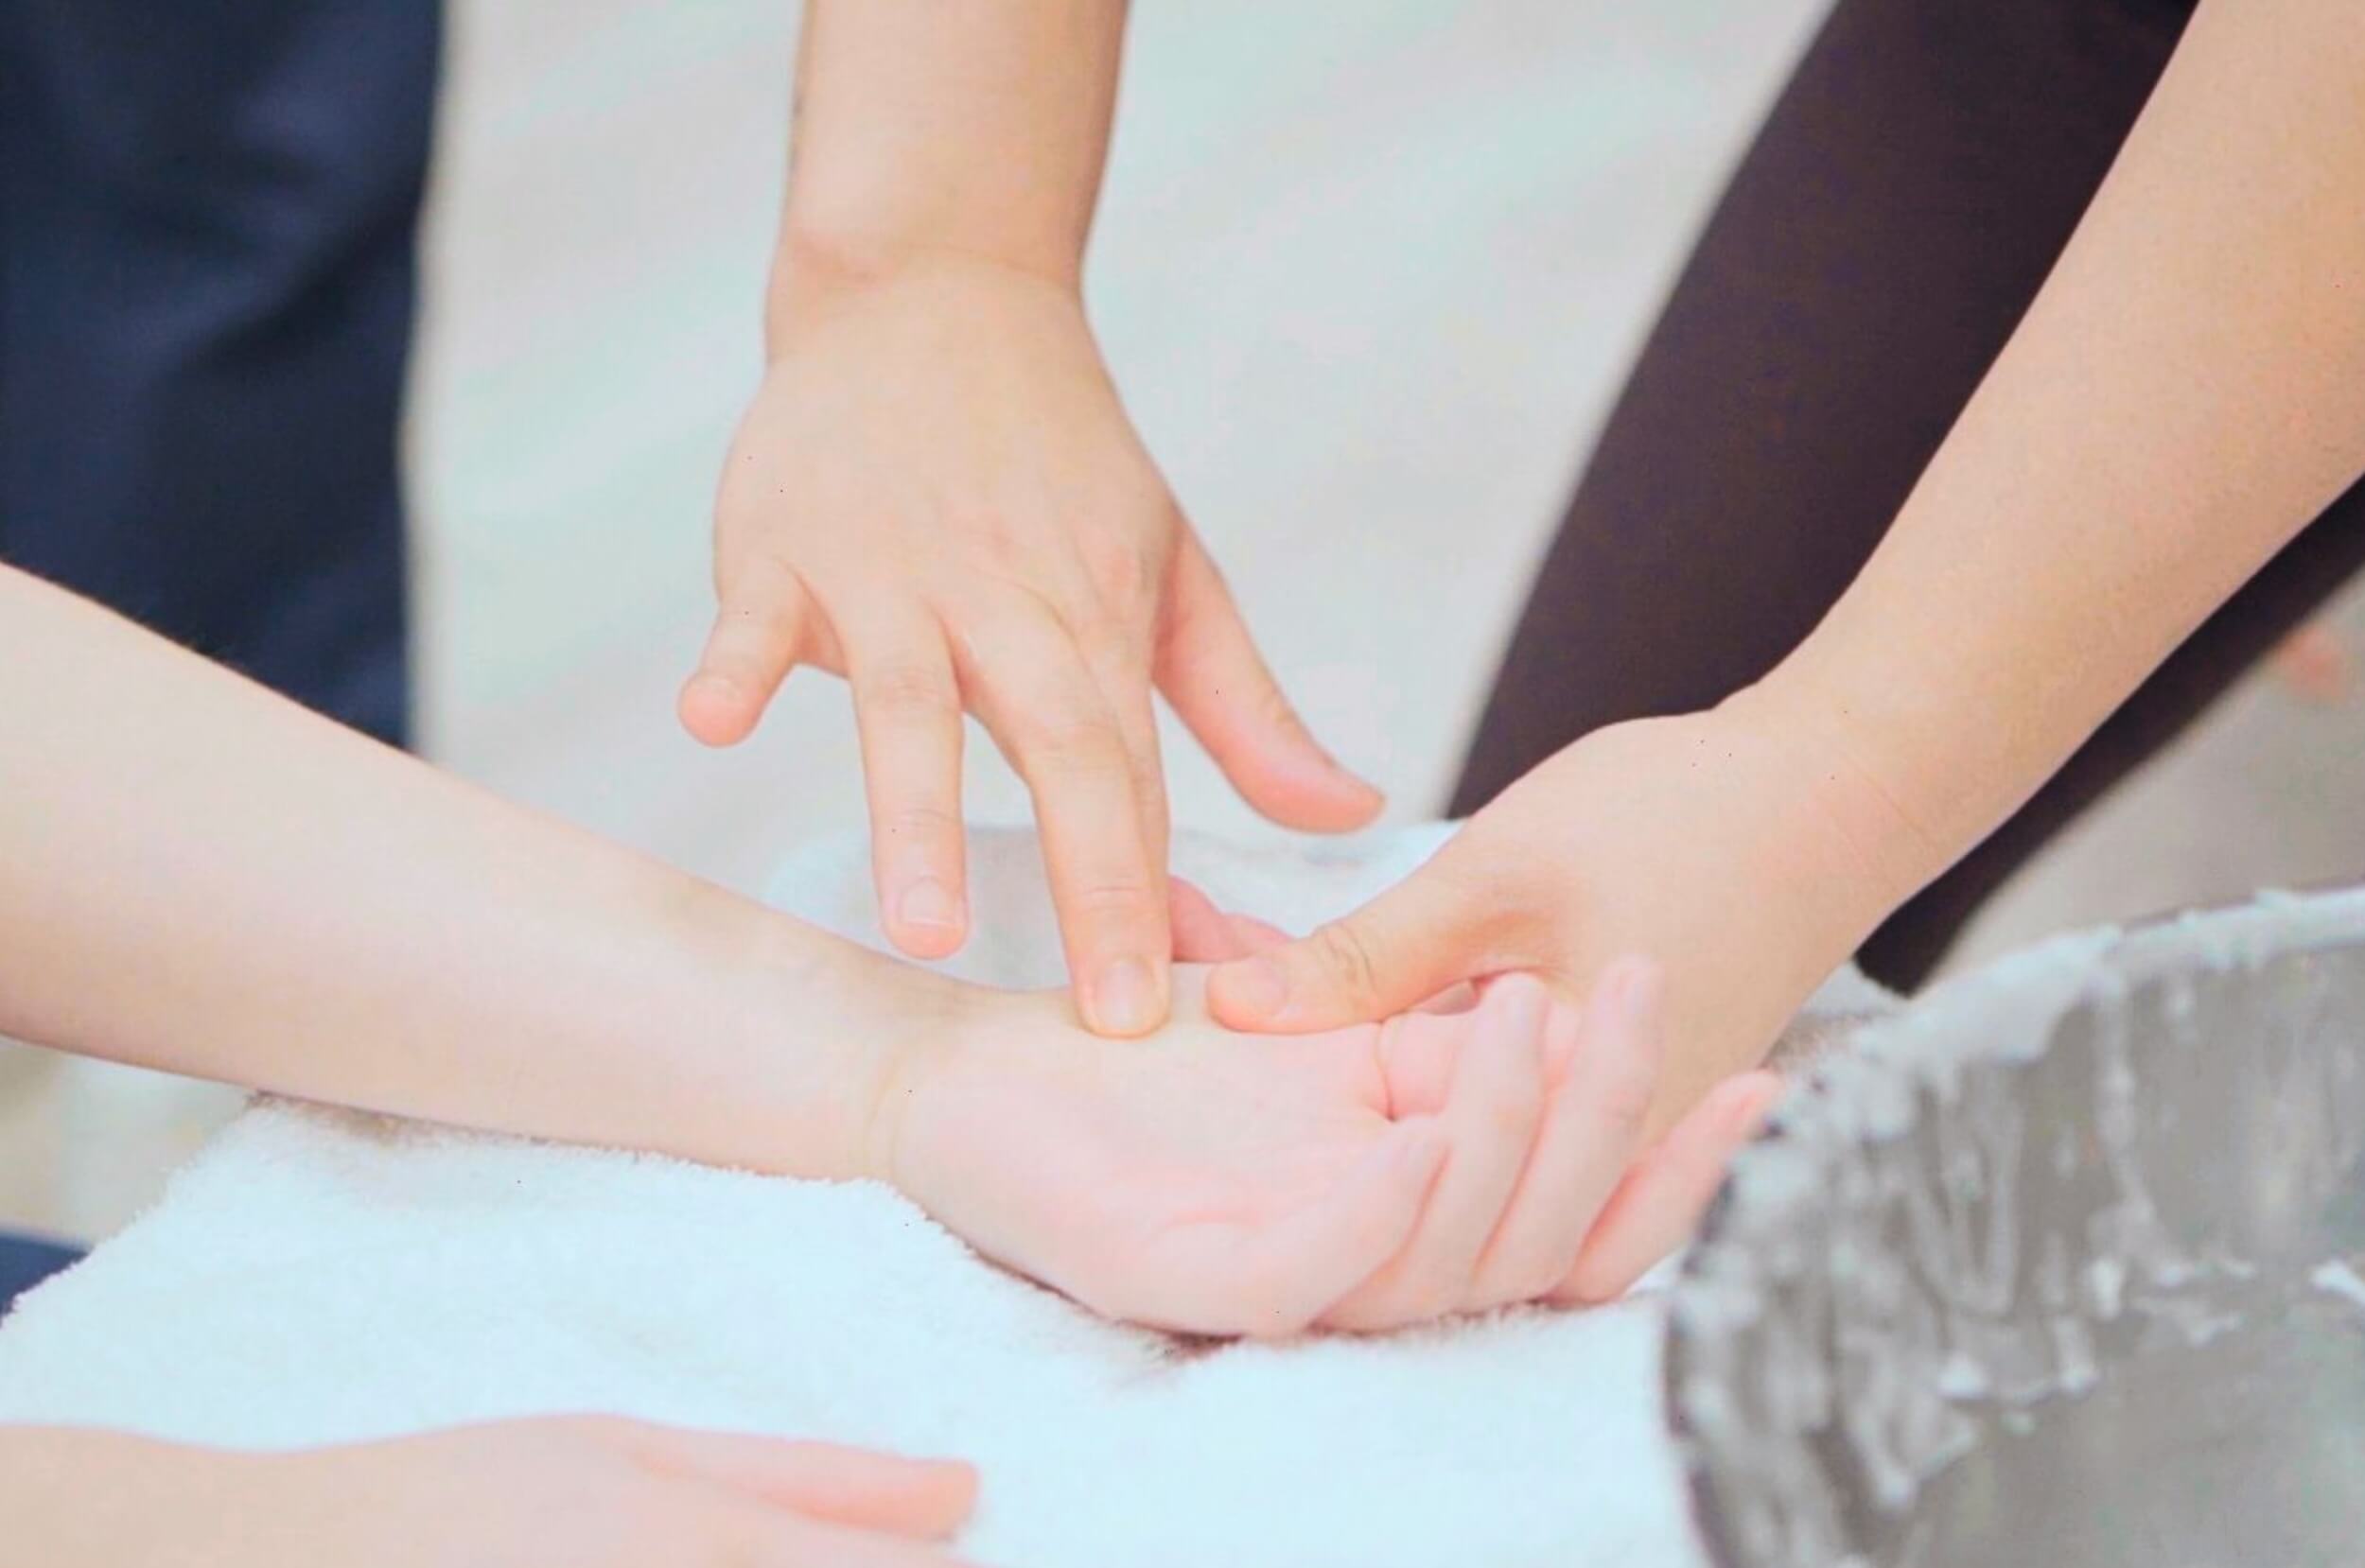 A student learning to massage a hand in one of her massage therapy courses classes.